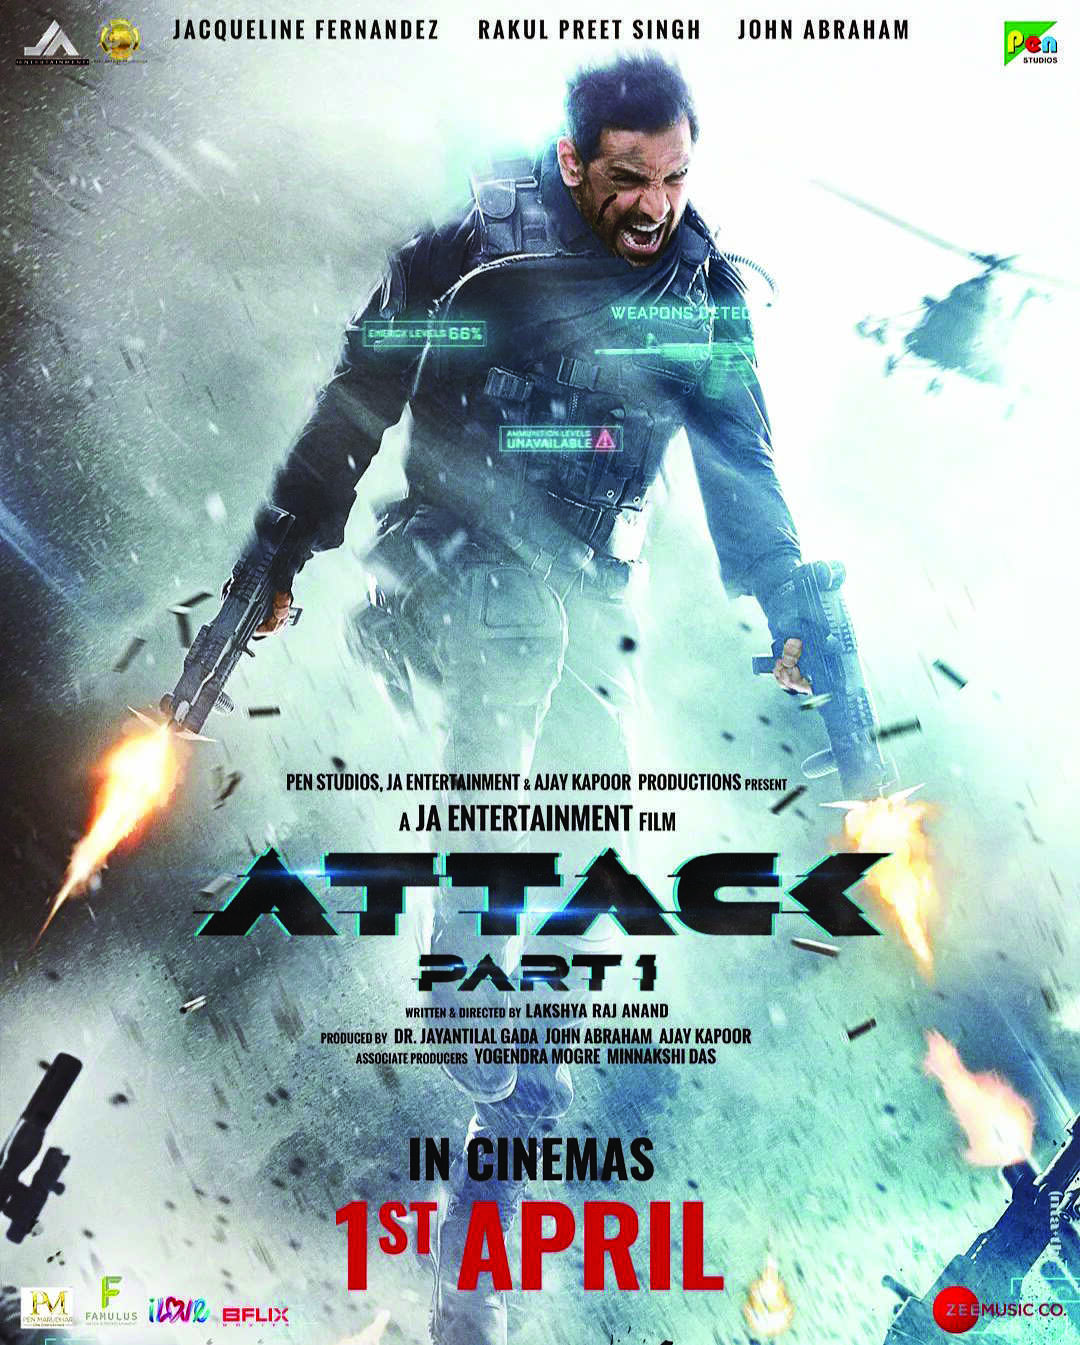 John Abraham is a super-solider in the trailer of Attack